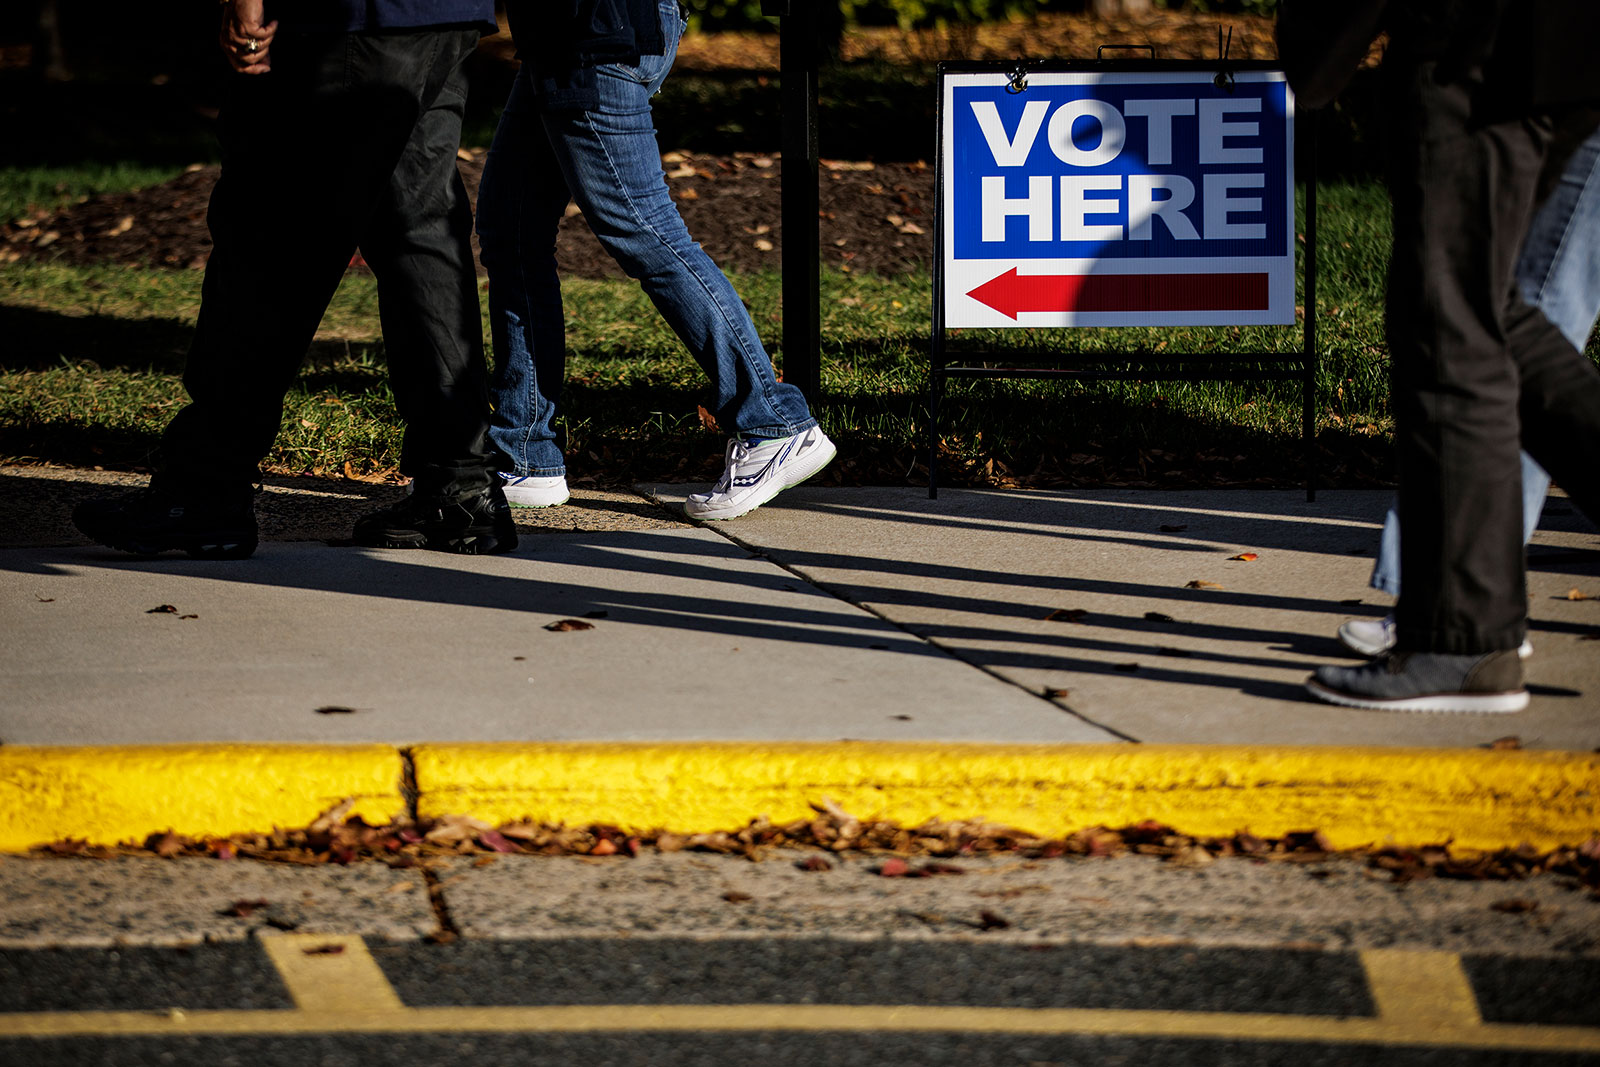 People walk towards an early voting location in Stafford, Virginia, on November 3.